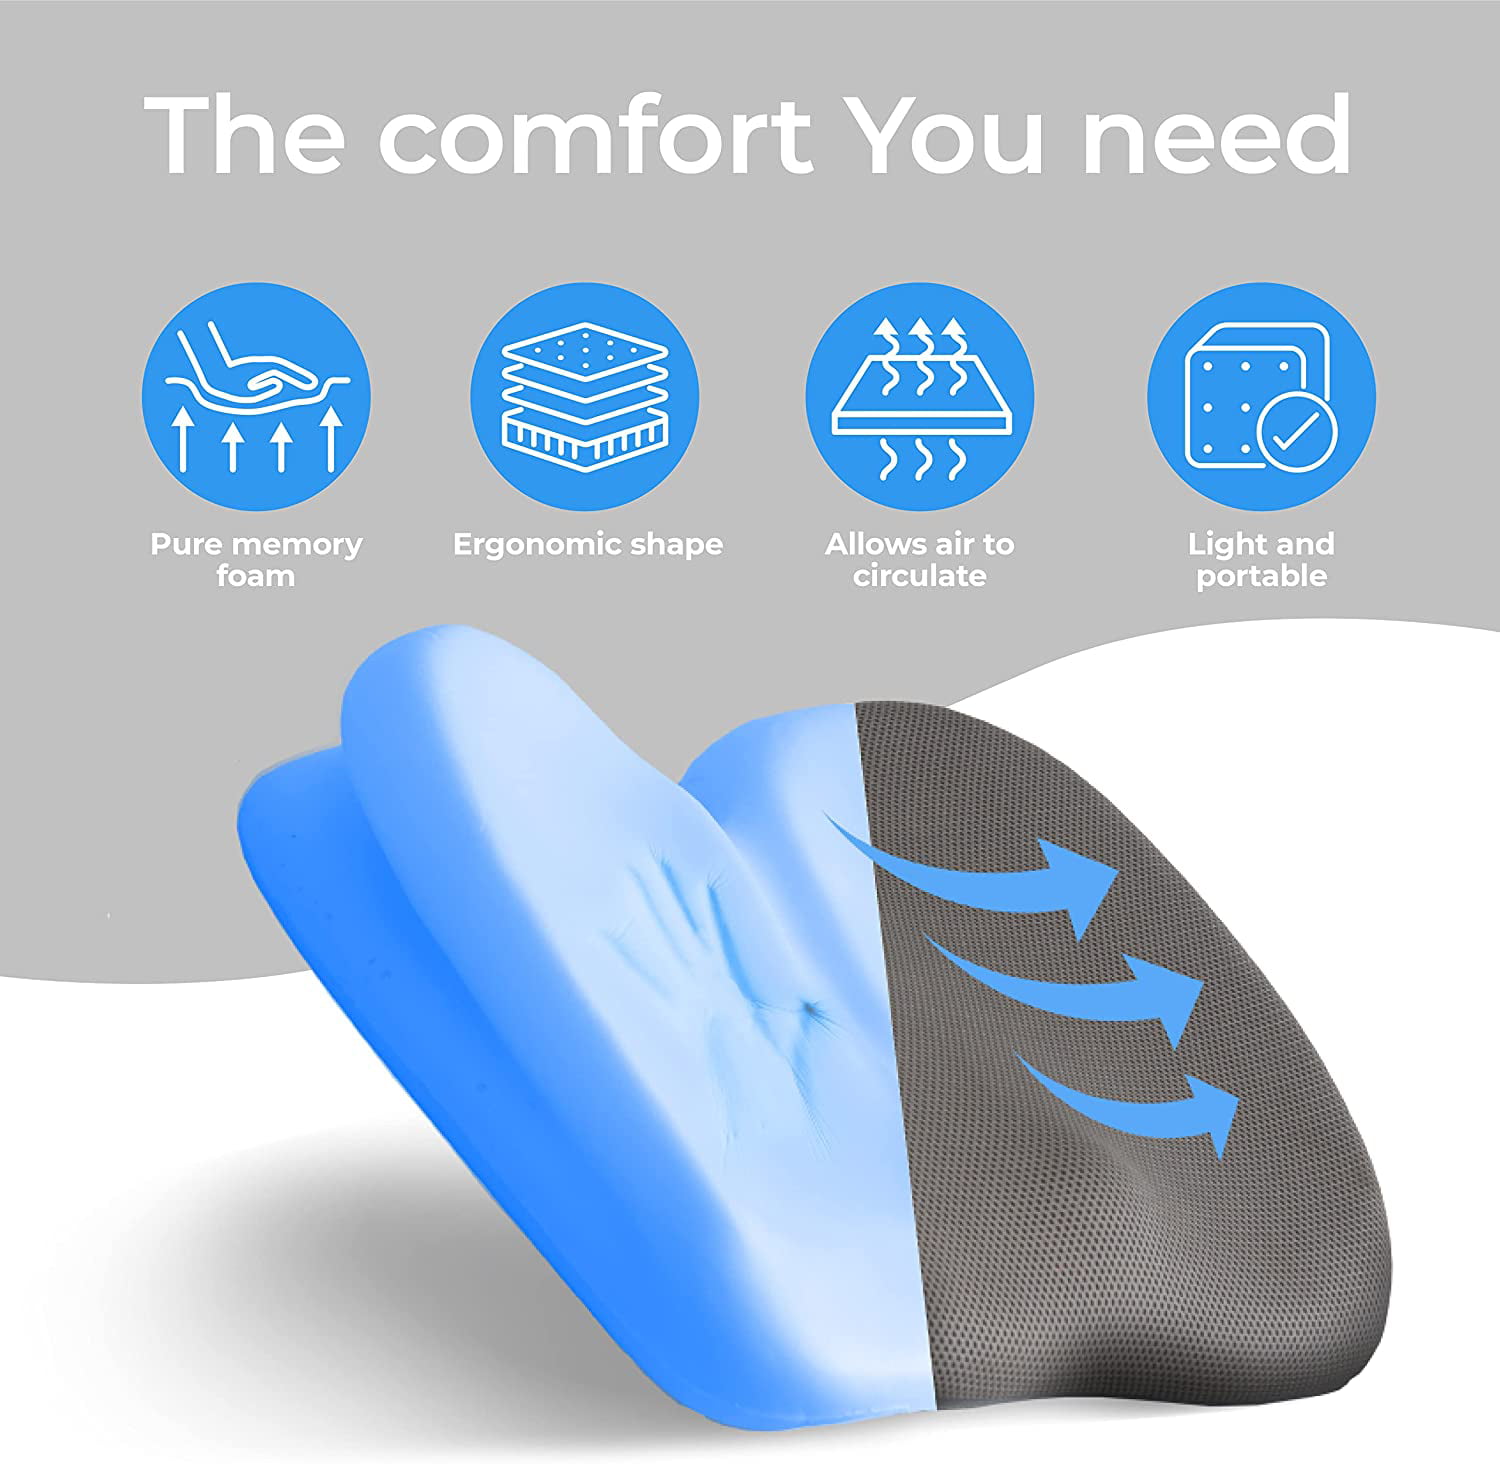 Klaudena | Office Chair Cushion for Tailbone Pain & Pressure Relief | Seat  Cushion for Long Sitting Hours | Coccyx Lower Back Support | Memory Foam